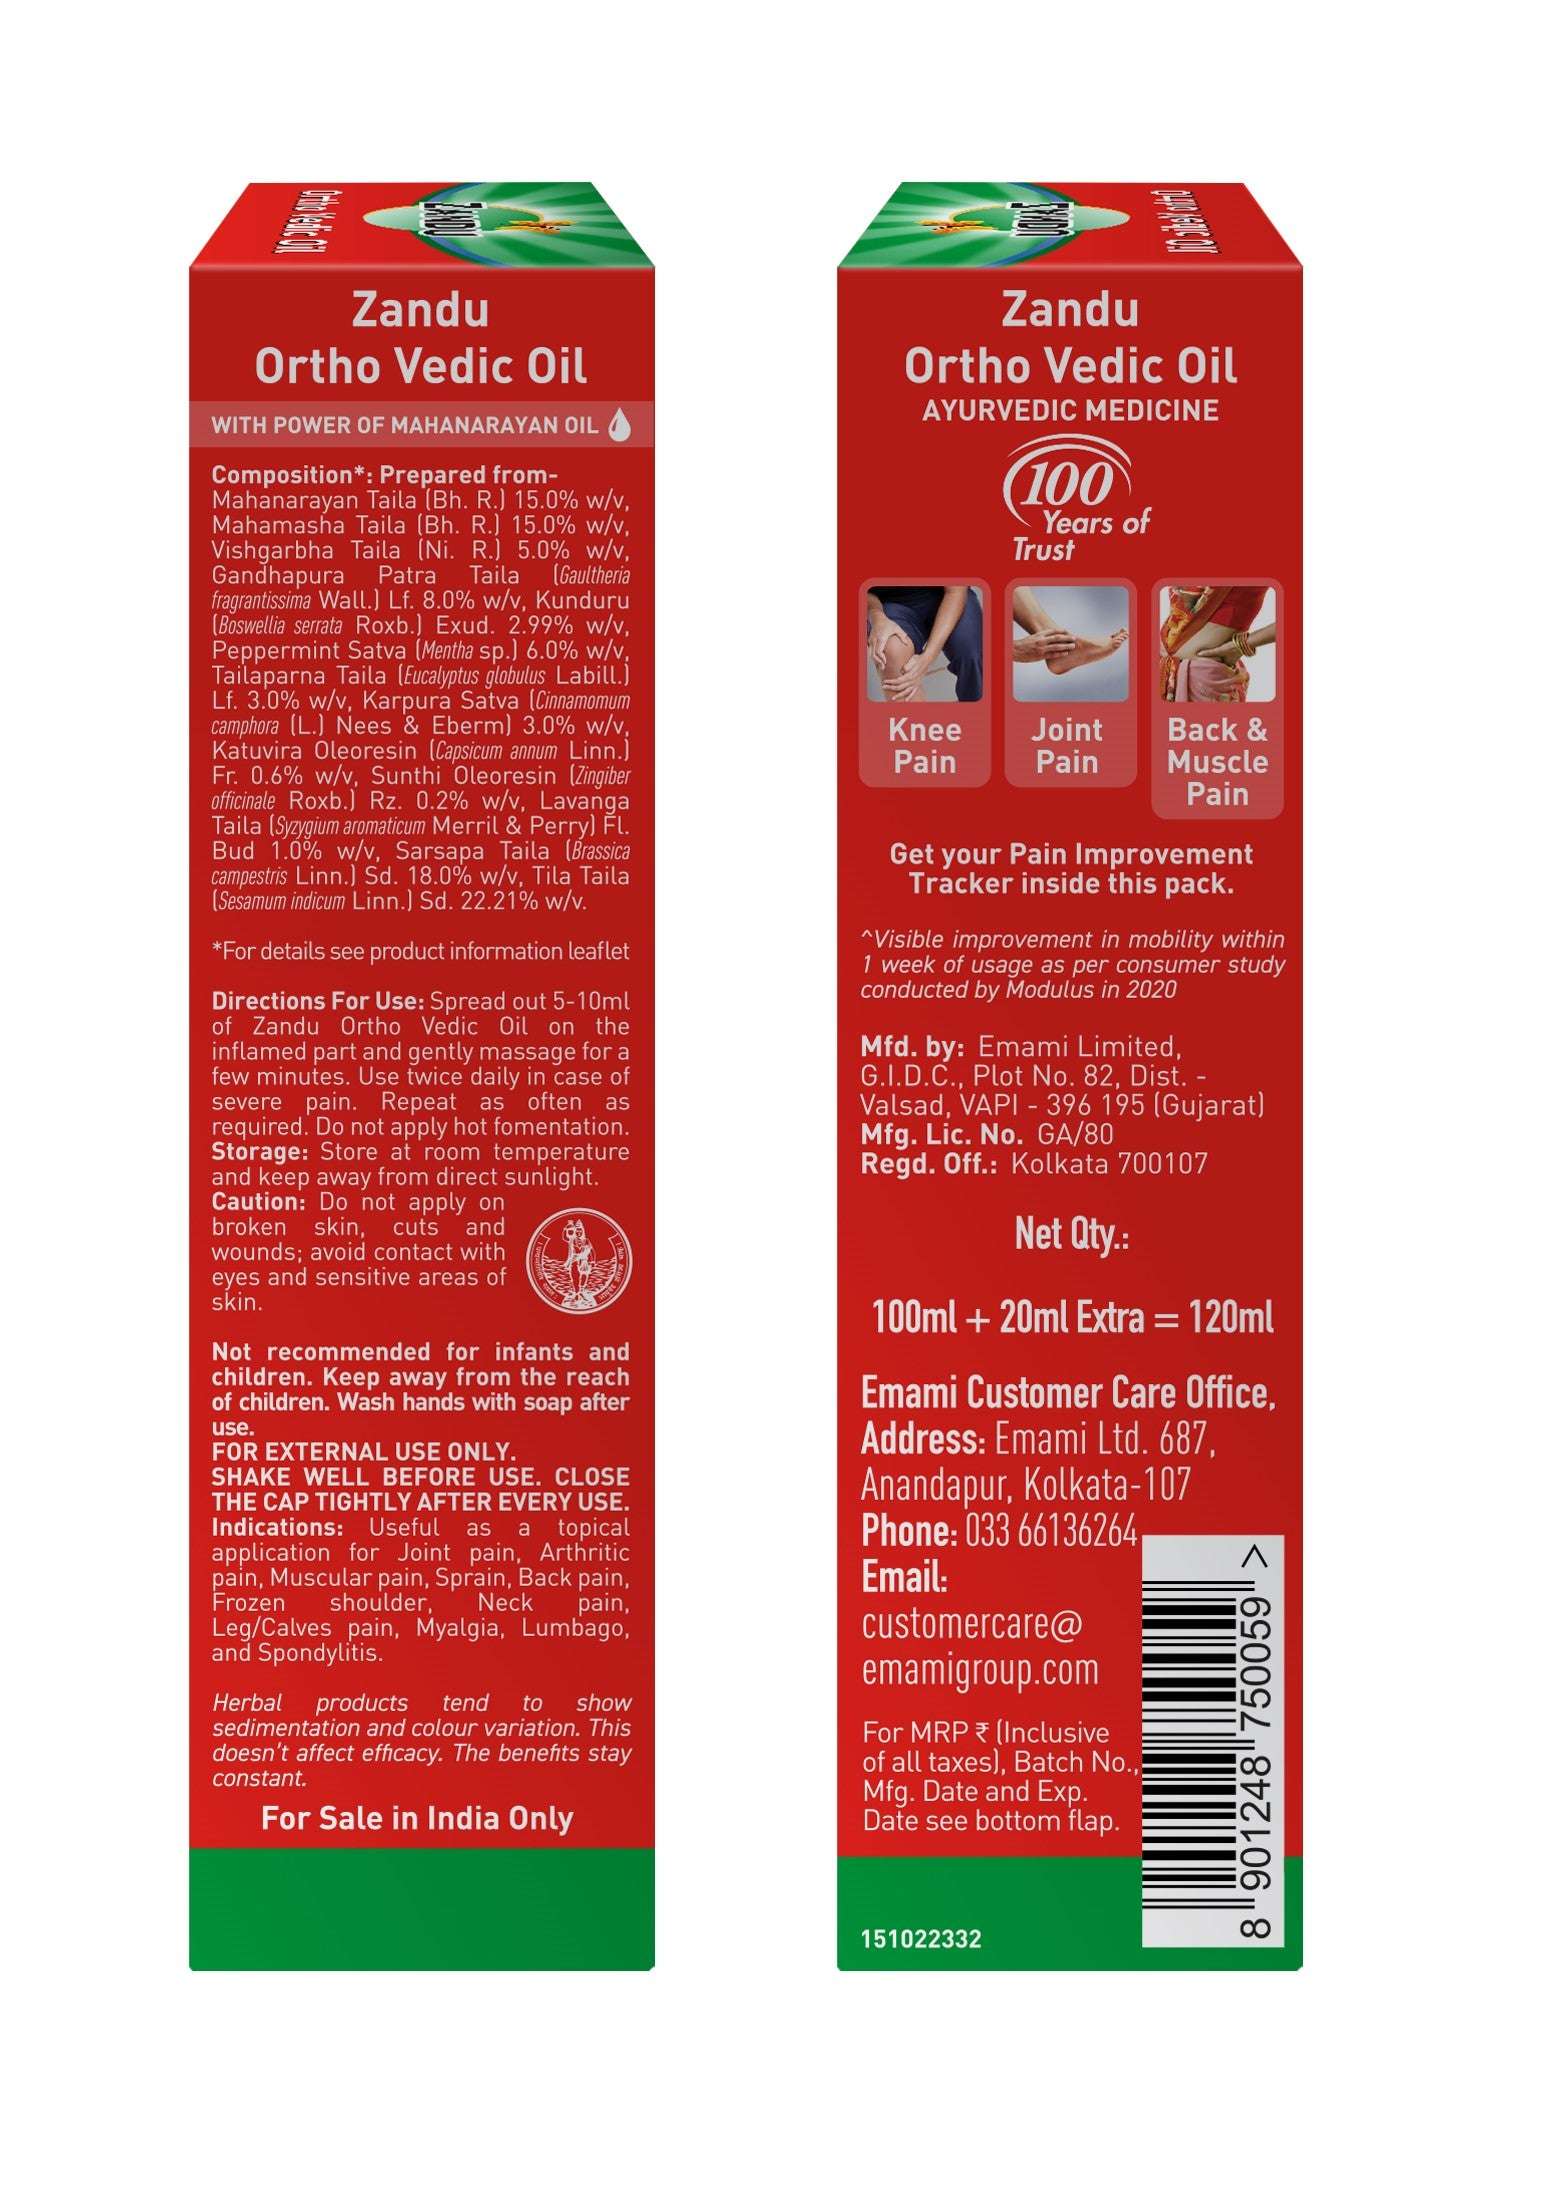 Ortho Vedic Pain Relief Oil for Joint, Knee, Back & Muscle (100ml)